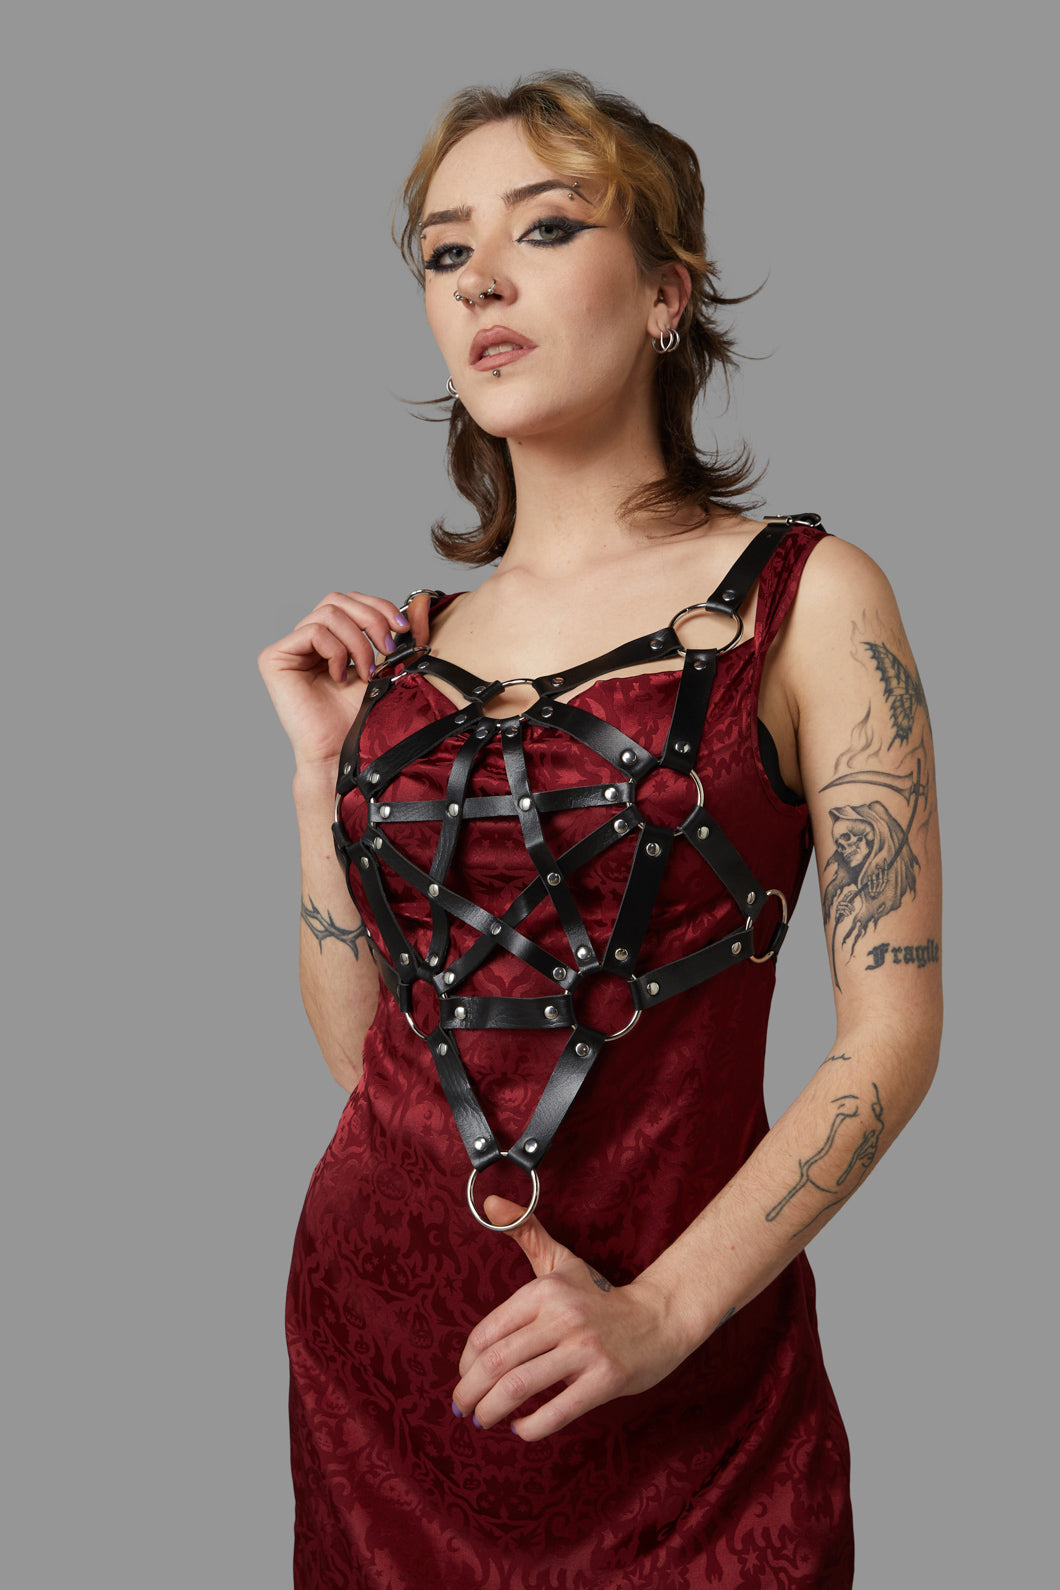 New Arrivals Sliver Body Chain Harness Top Red Disk Heart Women